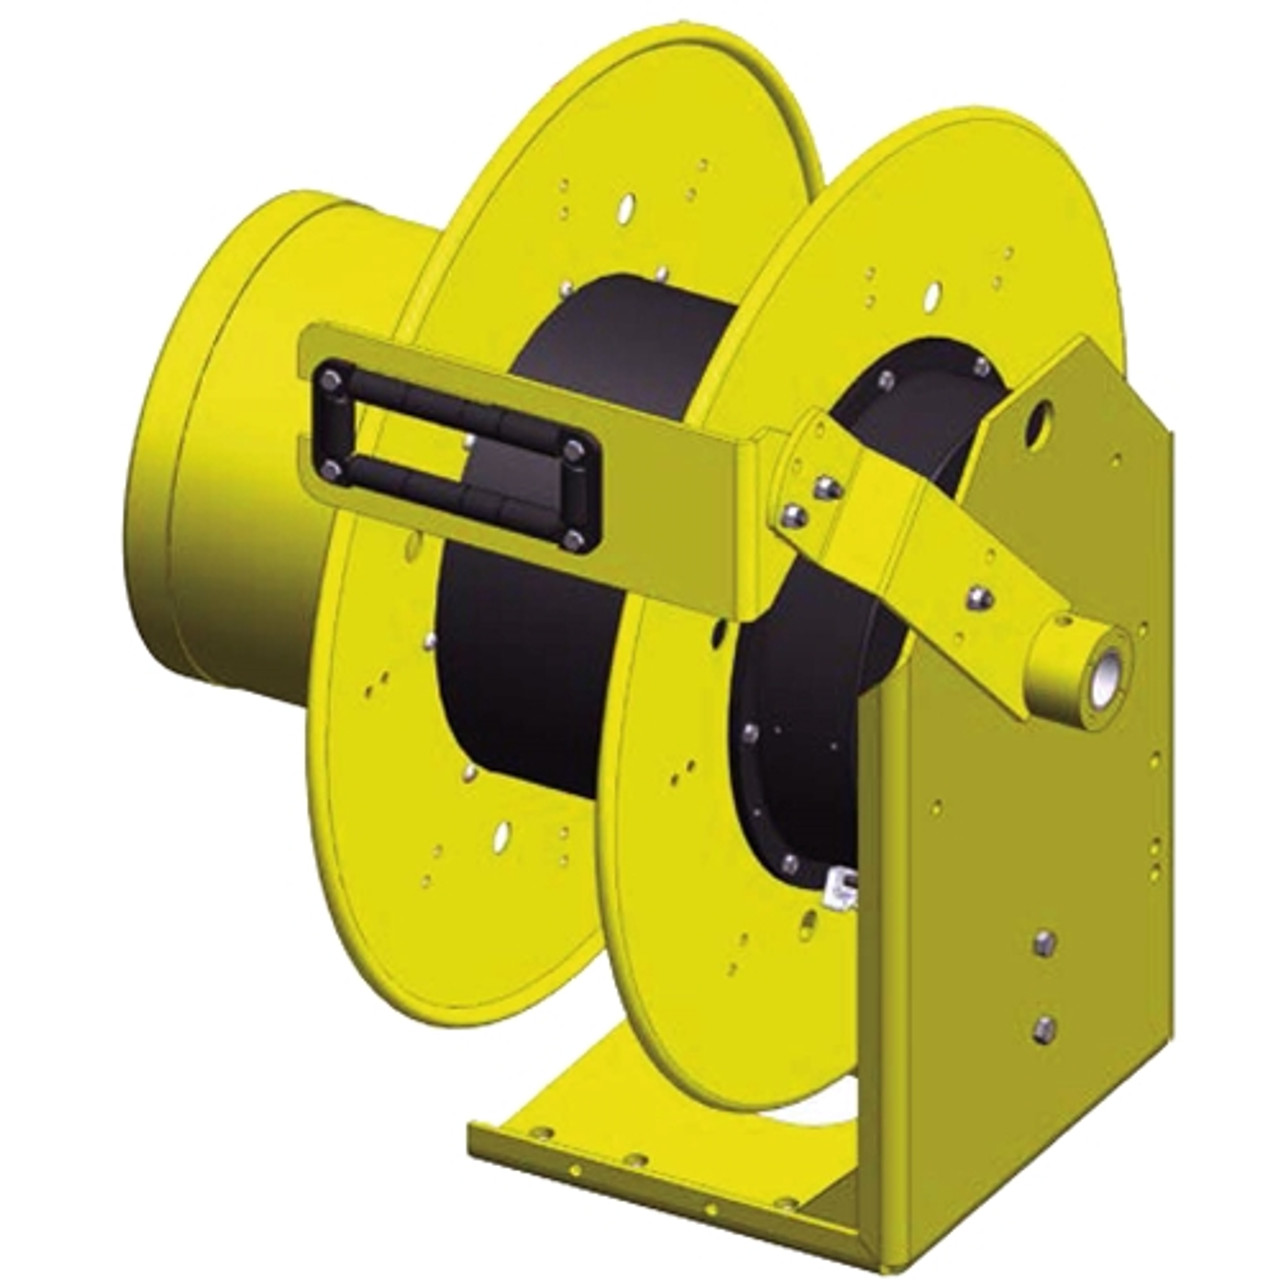 Conductix Cable Reels | Spring Driven and Motorized Cable Reels